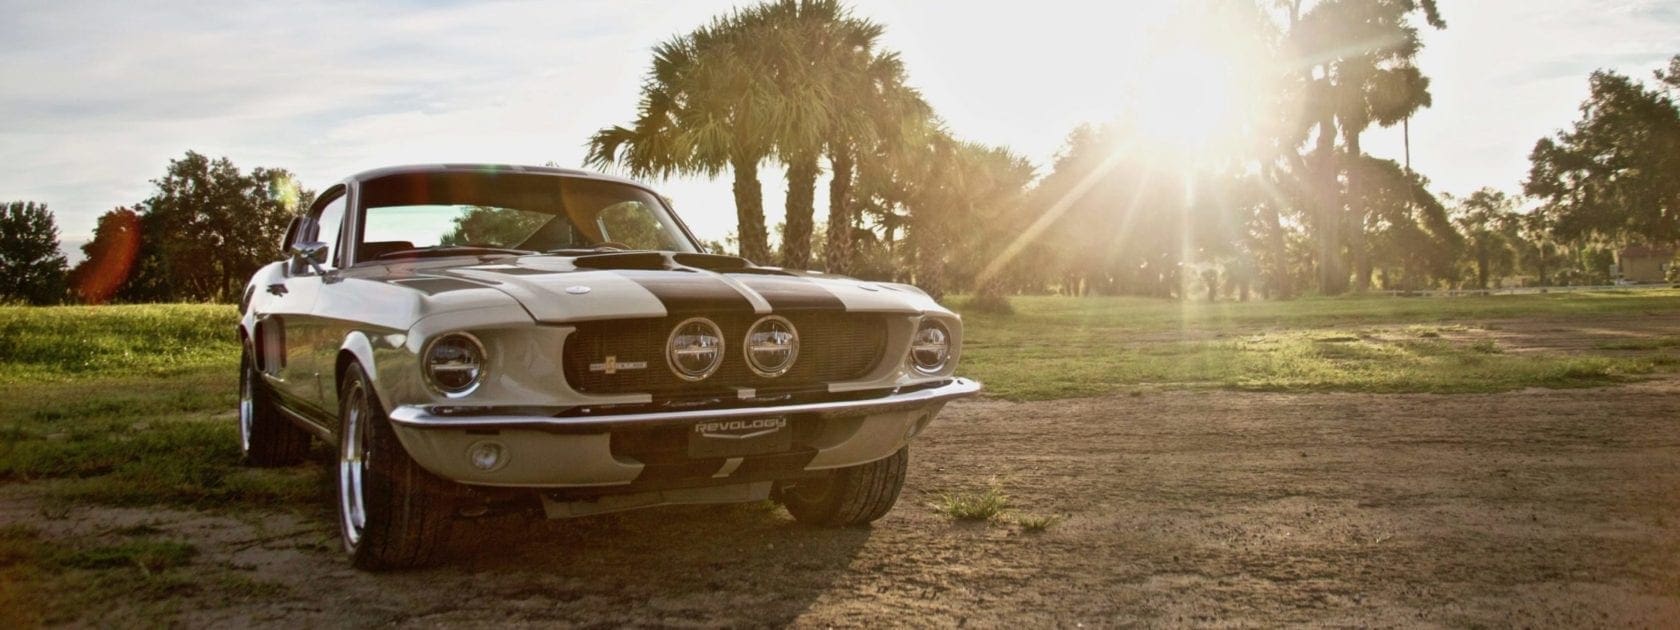 Winter Park company selling 'new' 1964 1/2 Ford Mustangs